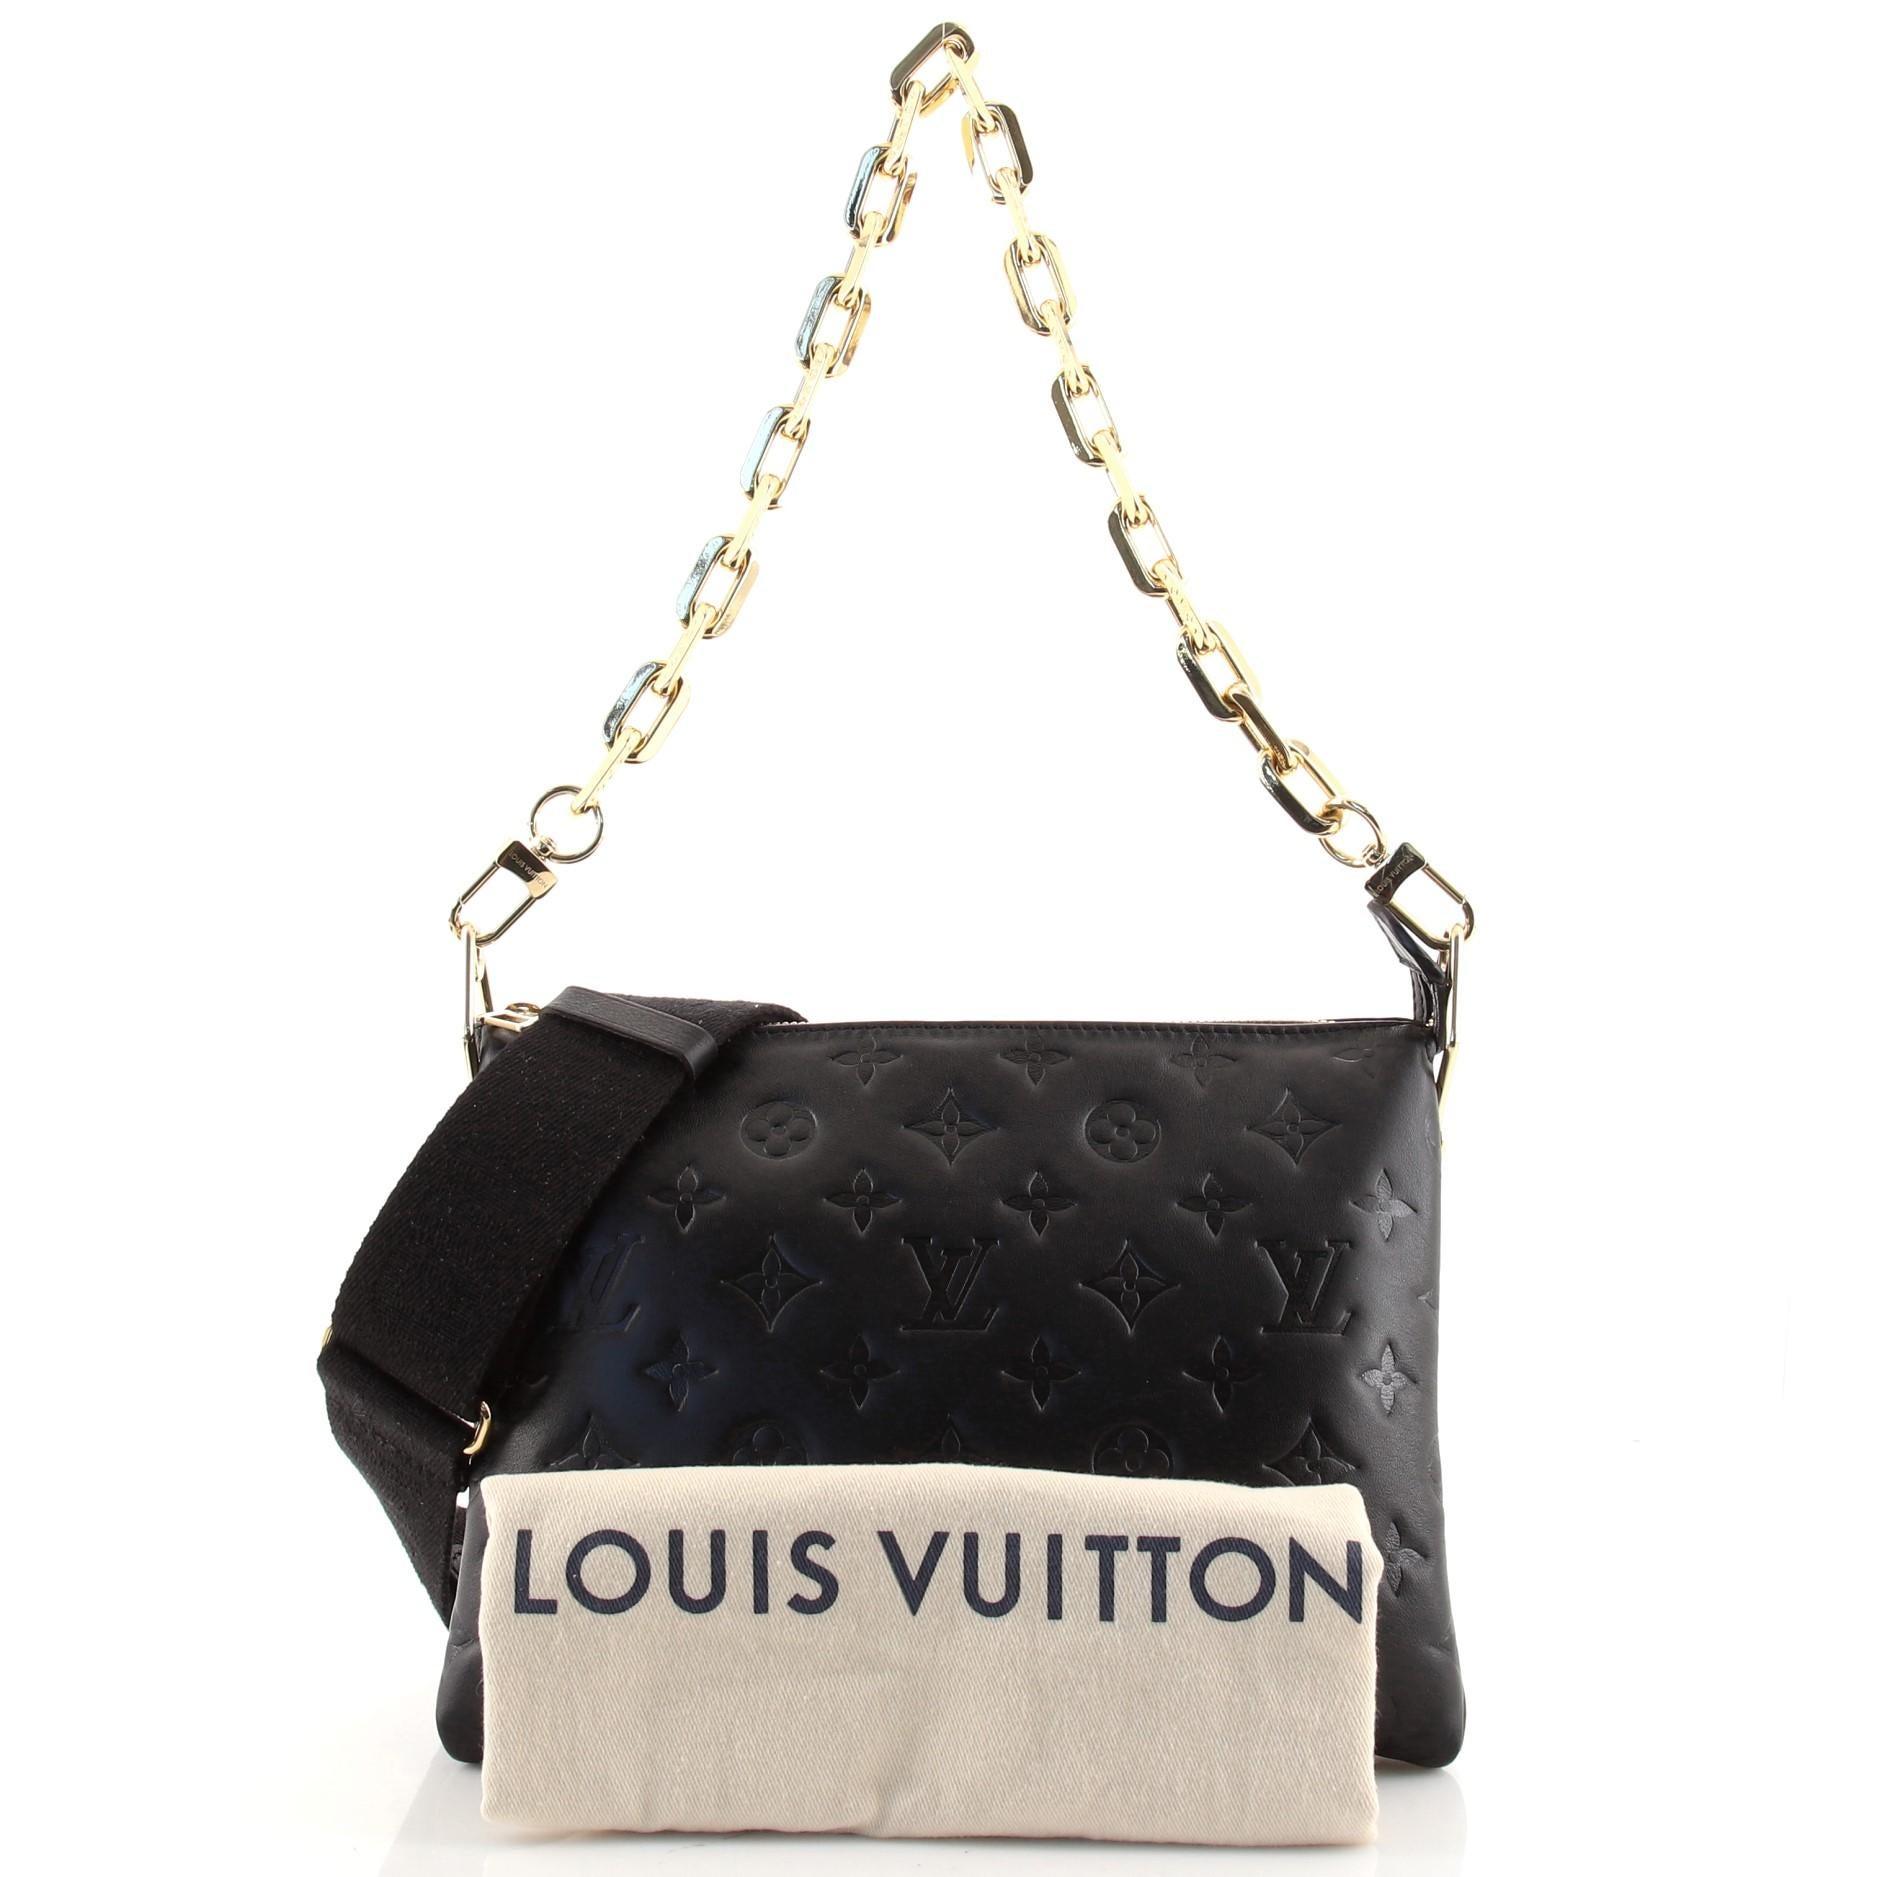 SAVE BIG on Louis Vuitton X Yayoi Kusama White Leather Monogram Coussin PM  Chain Shoulder Bag Louis Vuitton . Shop for the best items at a great price  and get outstanding service